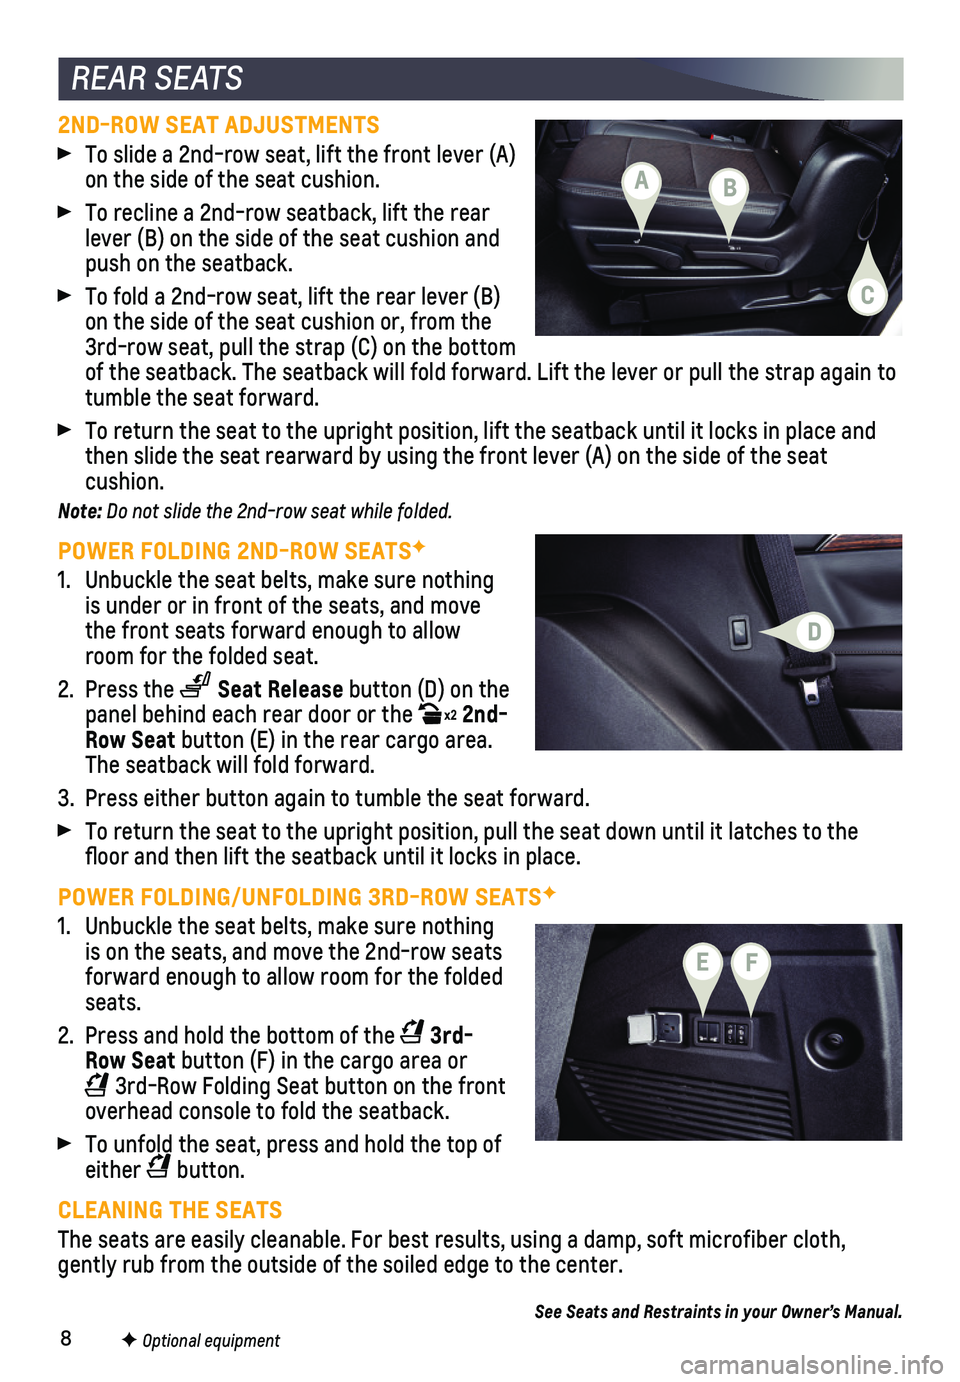 CHEVROLET TAHOE 2021  Get To Know Guide 8F Optional equipment
2ND-ROW SEAT ADJUSTMENTS
 To slide a 2nd-row seat, lift the front lever (A) on the side of the seat cushion.
 To recline a 2nd-row seatback, lift the rear lever (B) on the side o